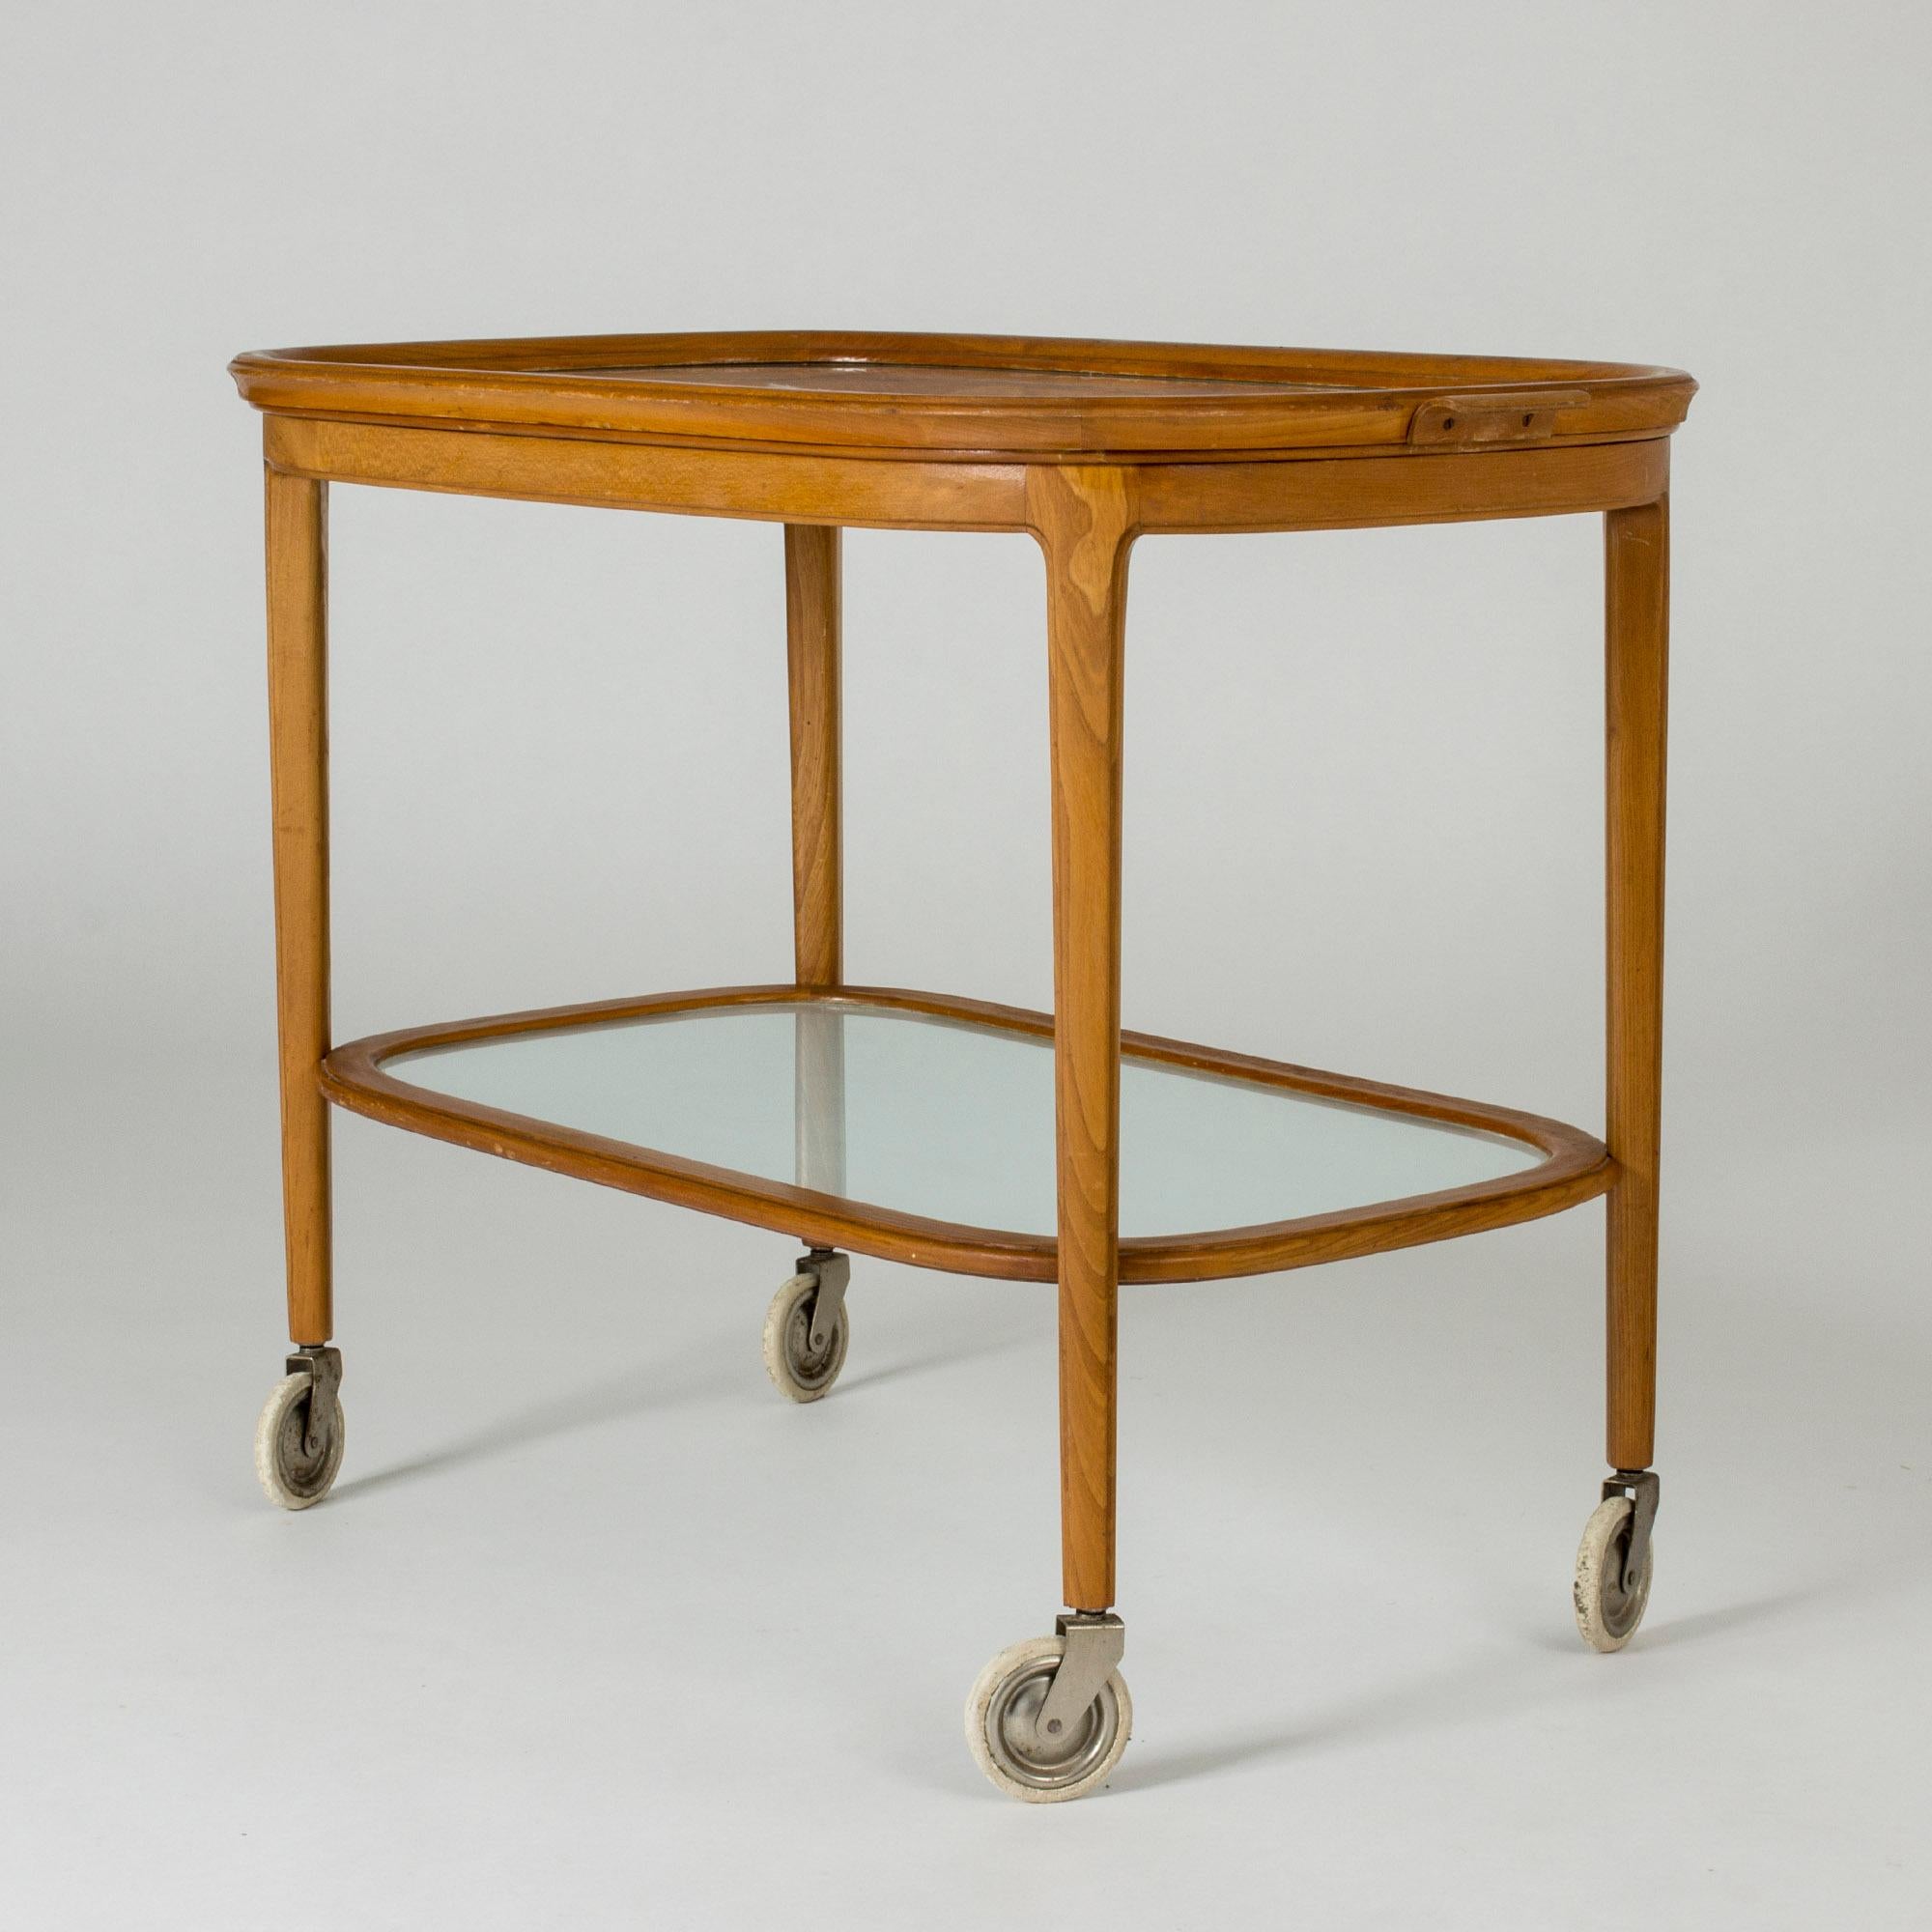 Beautiful Swedish midcentury serving trolley with a removable top tray. Made from elmwood with glass shelves. The top has a decorative etched diamond pattern.